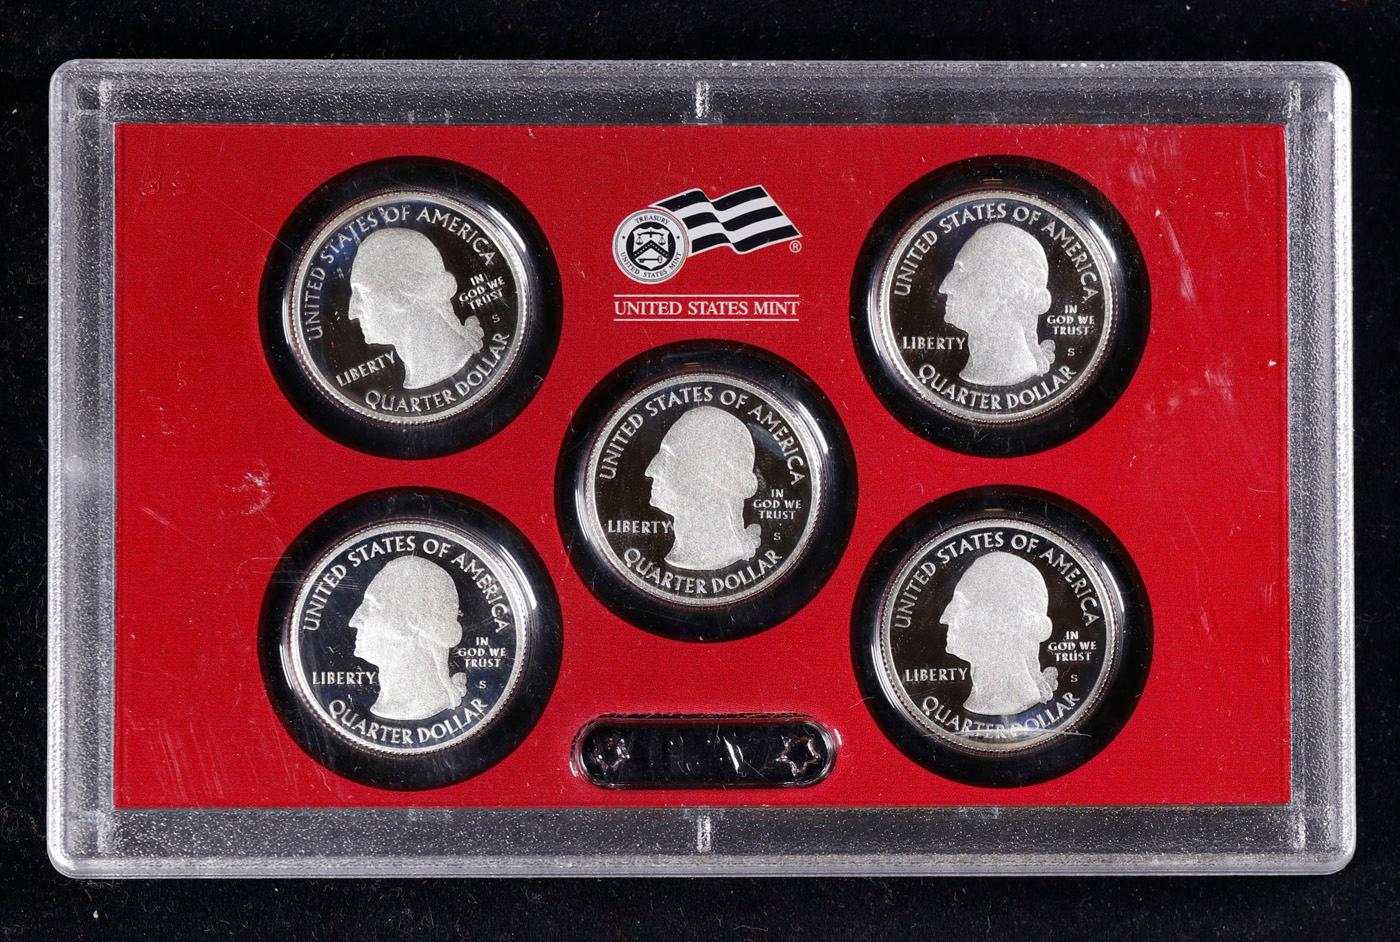 2010 United States Quarters America the Beautiful Silver Proof Set - 5 pc set No Outer Box